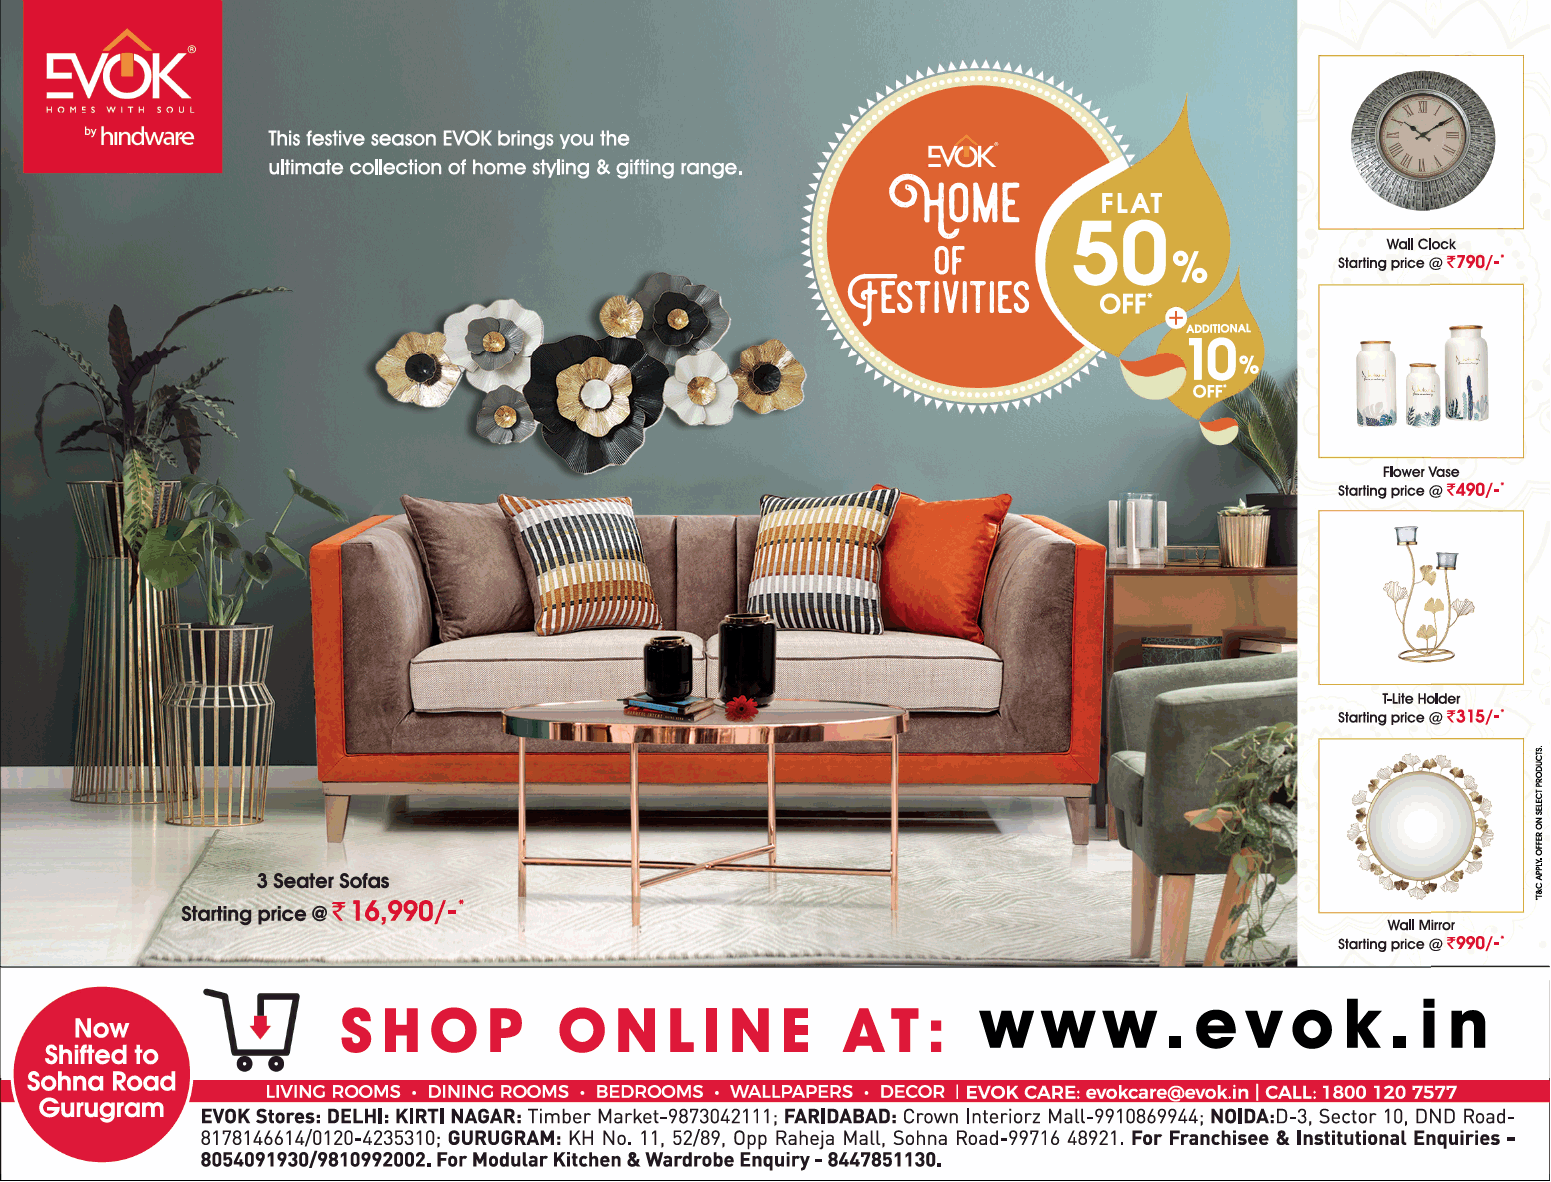 Evok By Hindware Home Of Festivities Flat 50% Off Ad - Advert Gallery